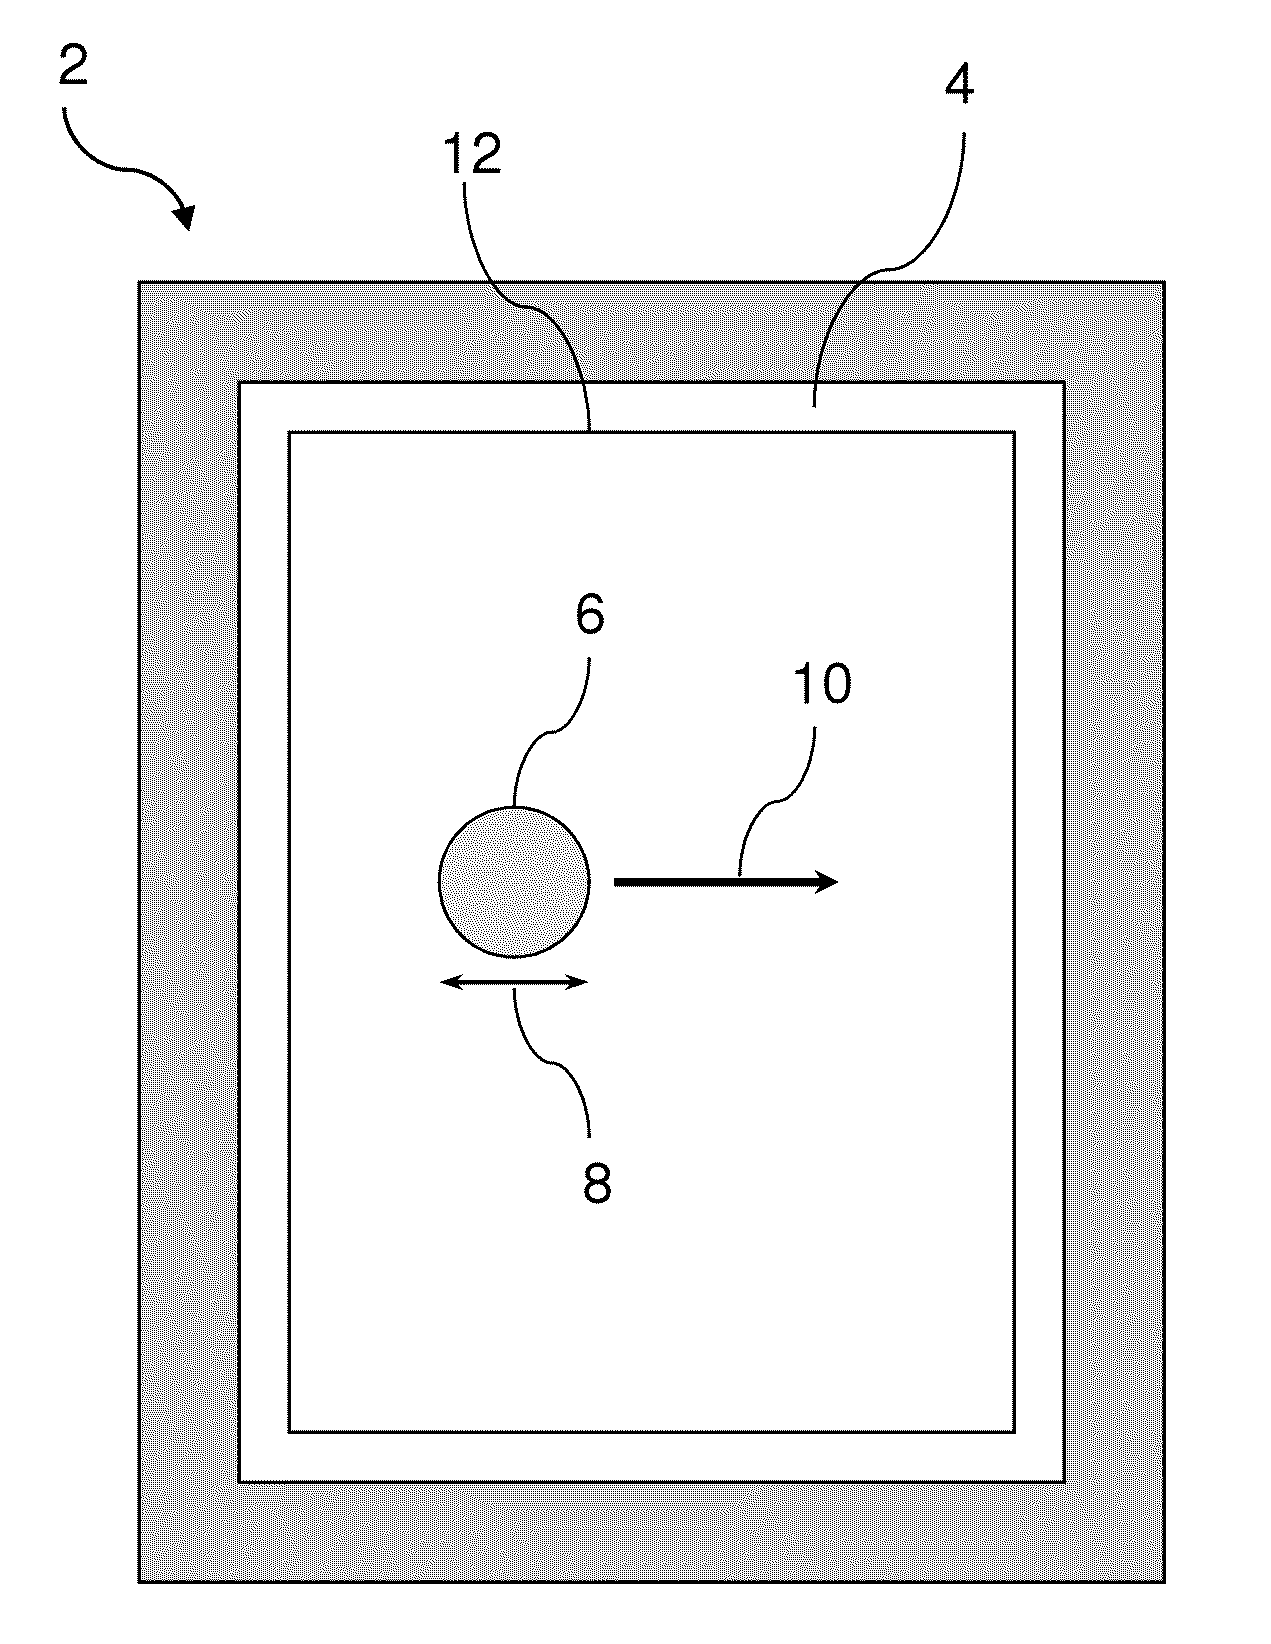 Methods for interacting with an on-screen document